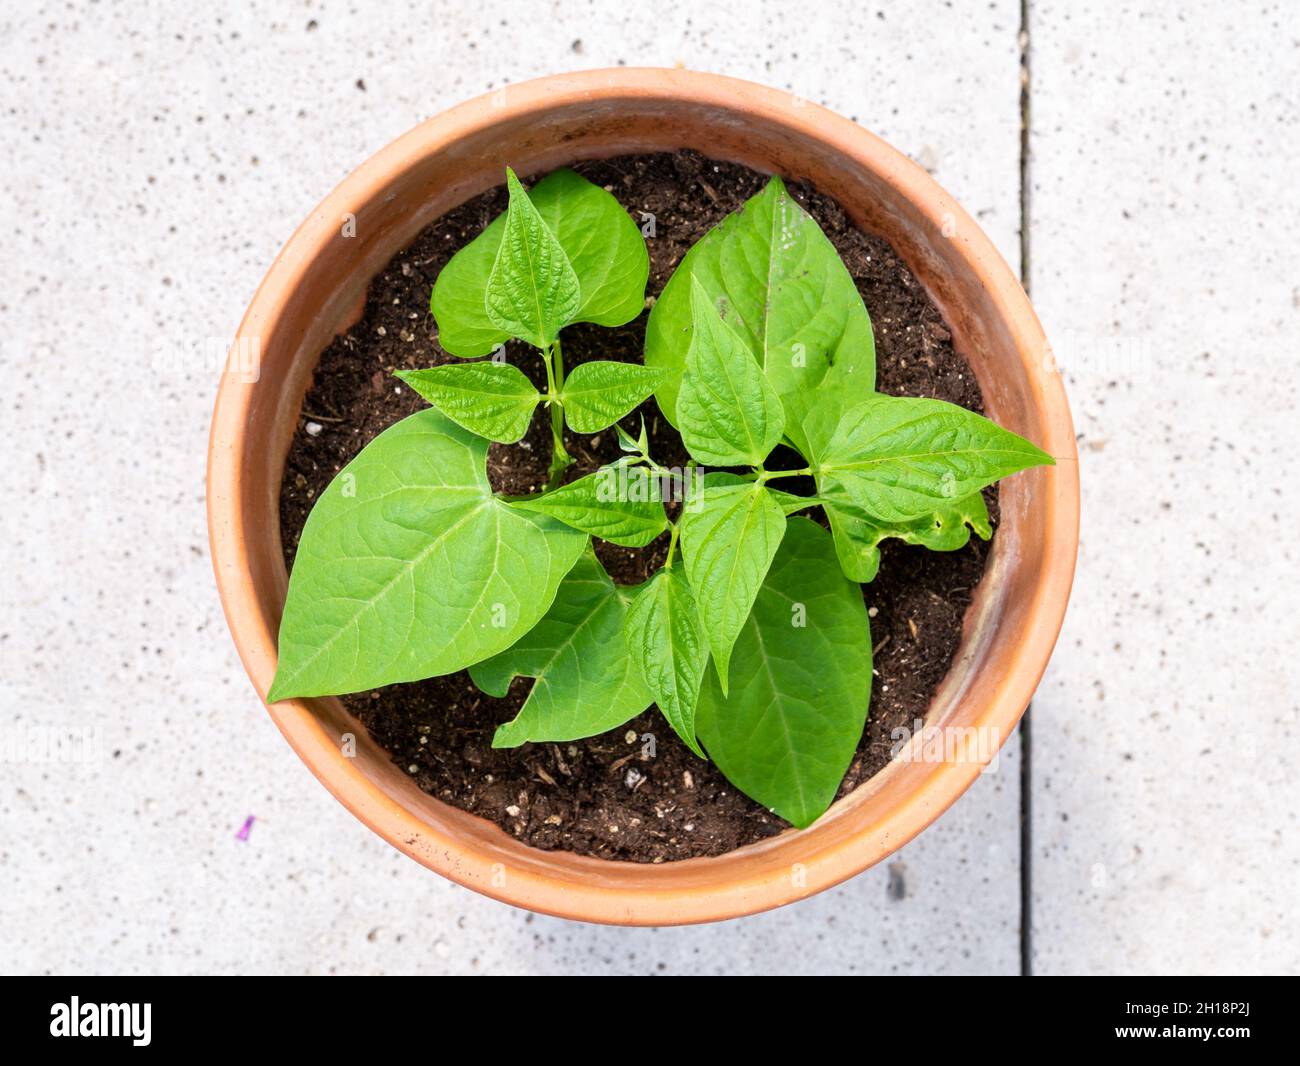 Dwarf French bean or common bean Faraday, Phaseolus vulgaris, top view of leaves of young plant growing in terracotta plant pot Stock Photo